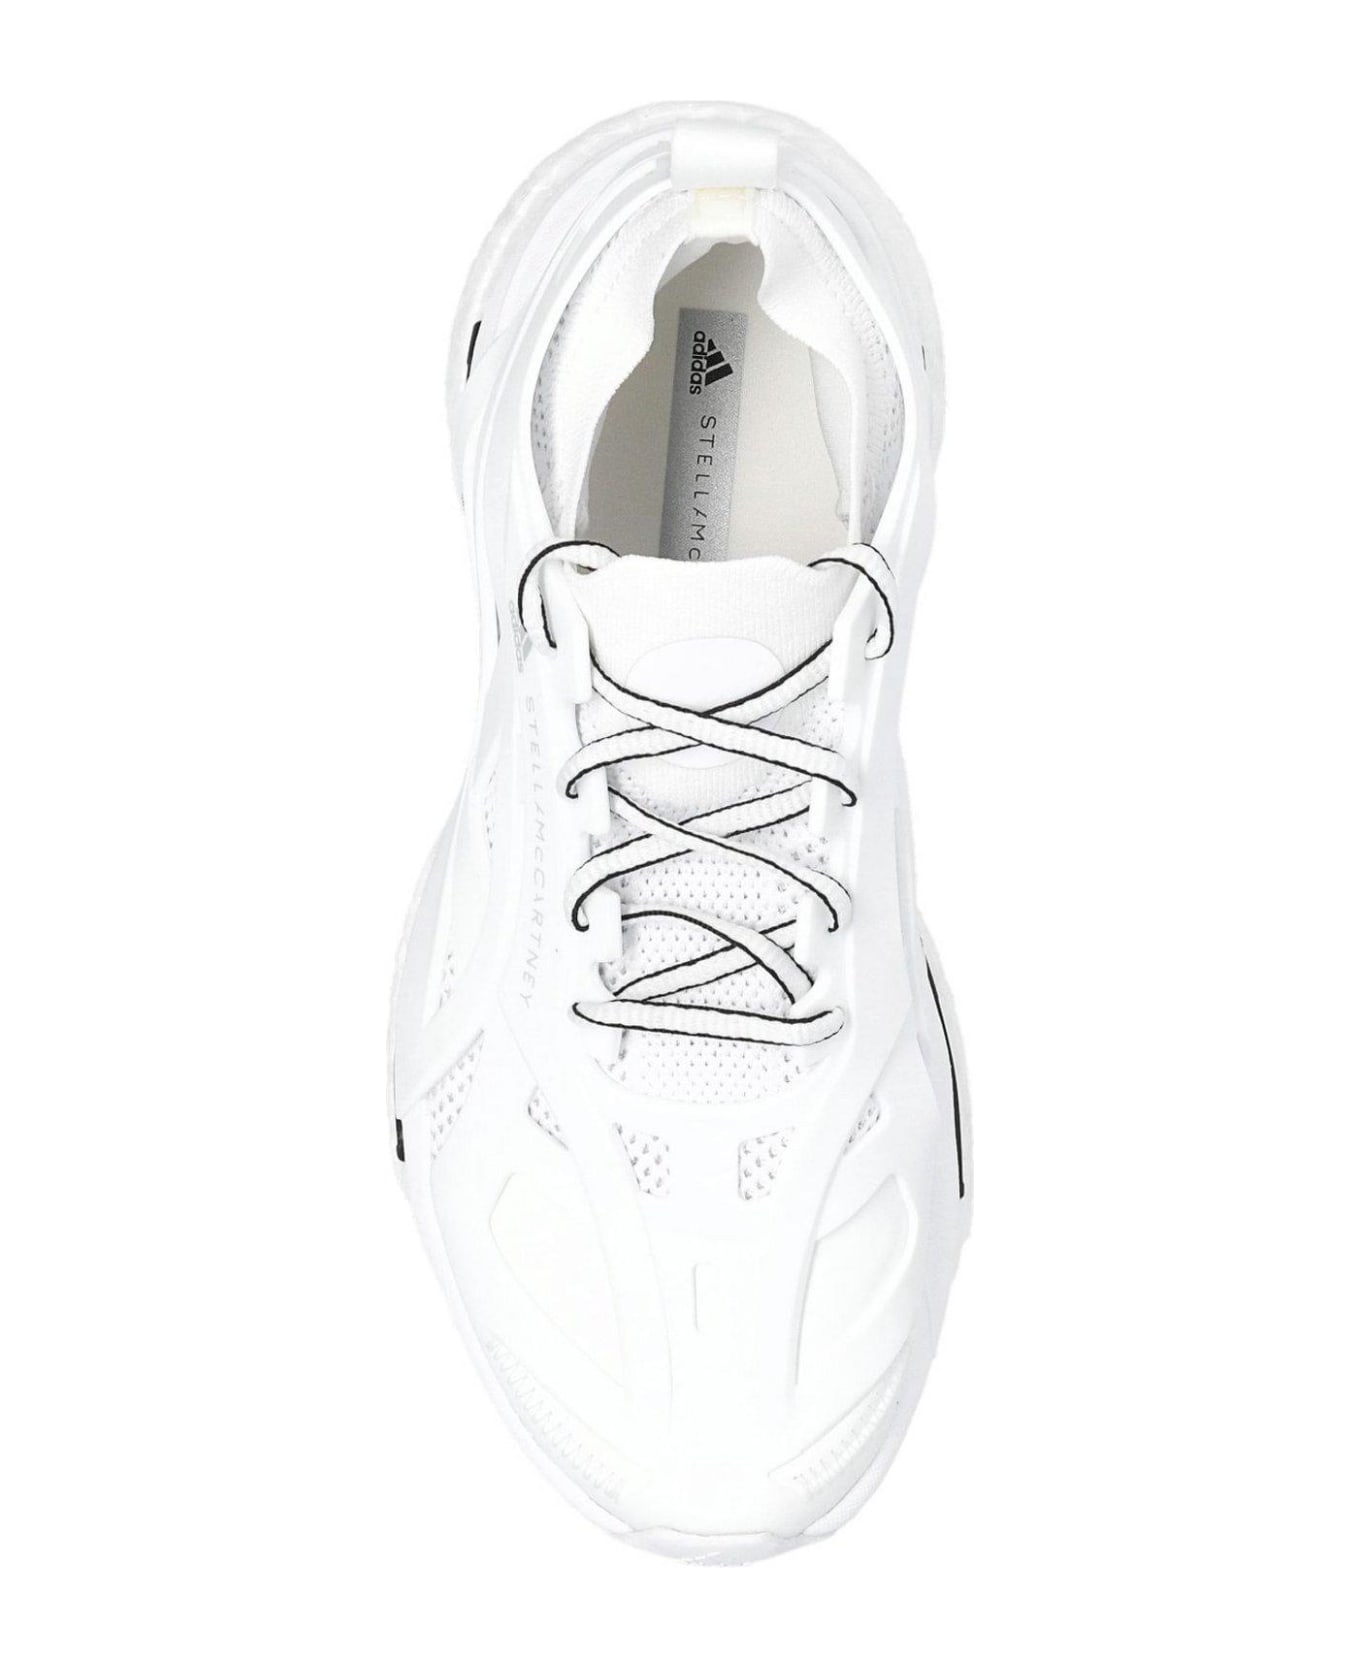 Adidas by Stella McCartney Solarglide Sneakers